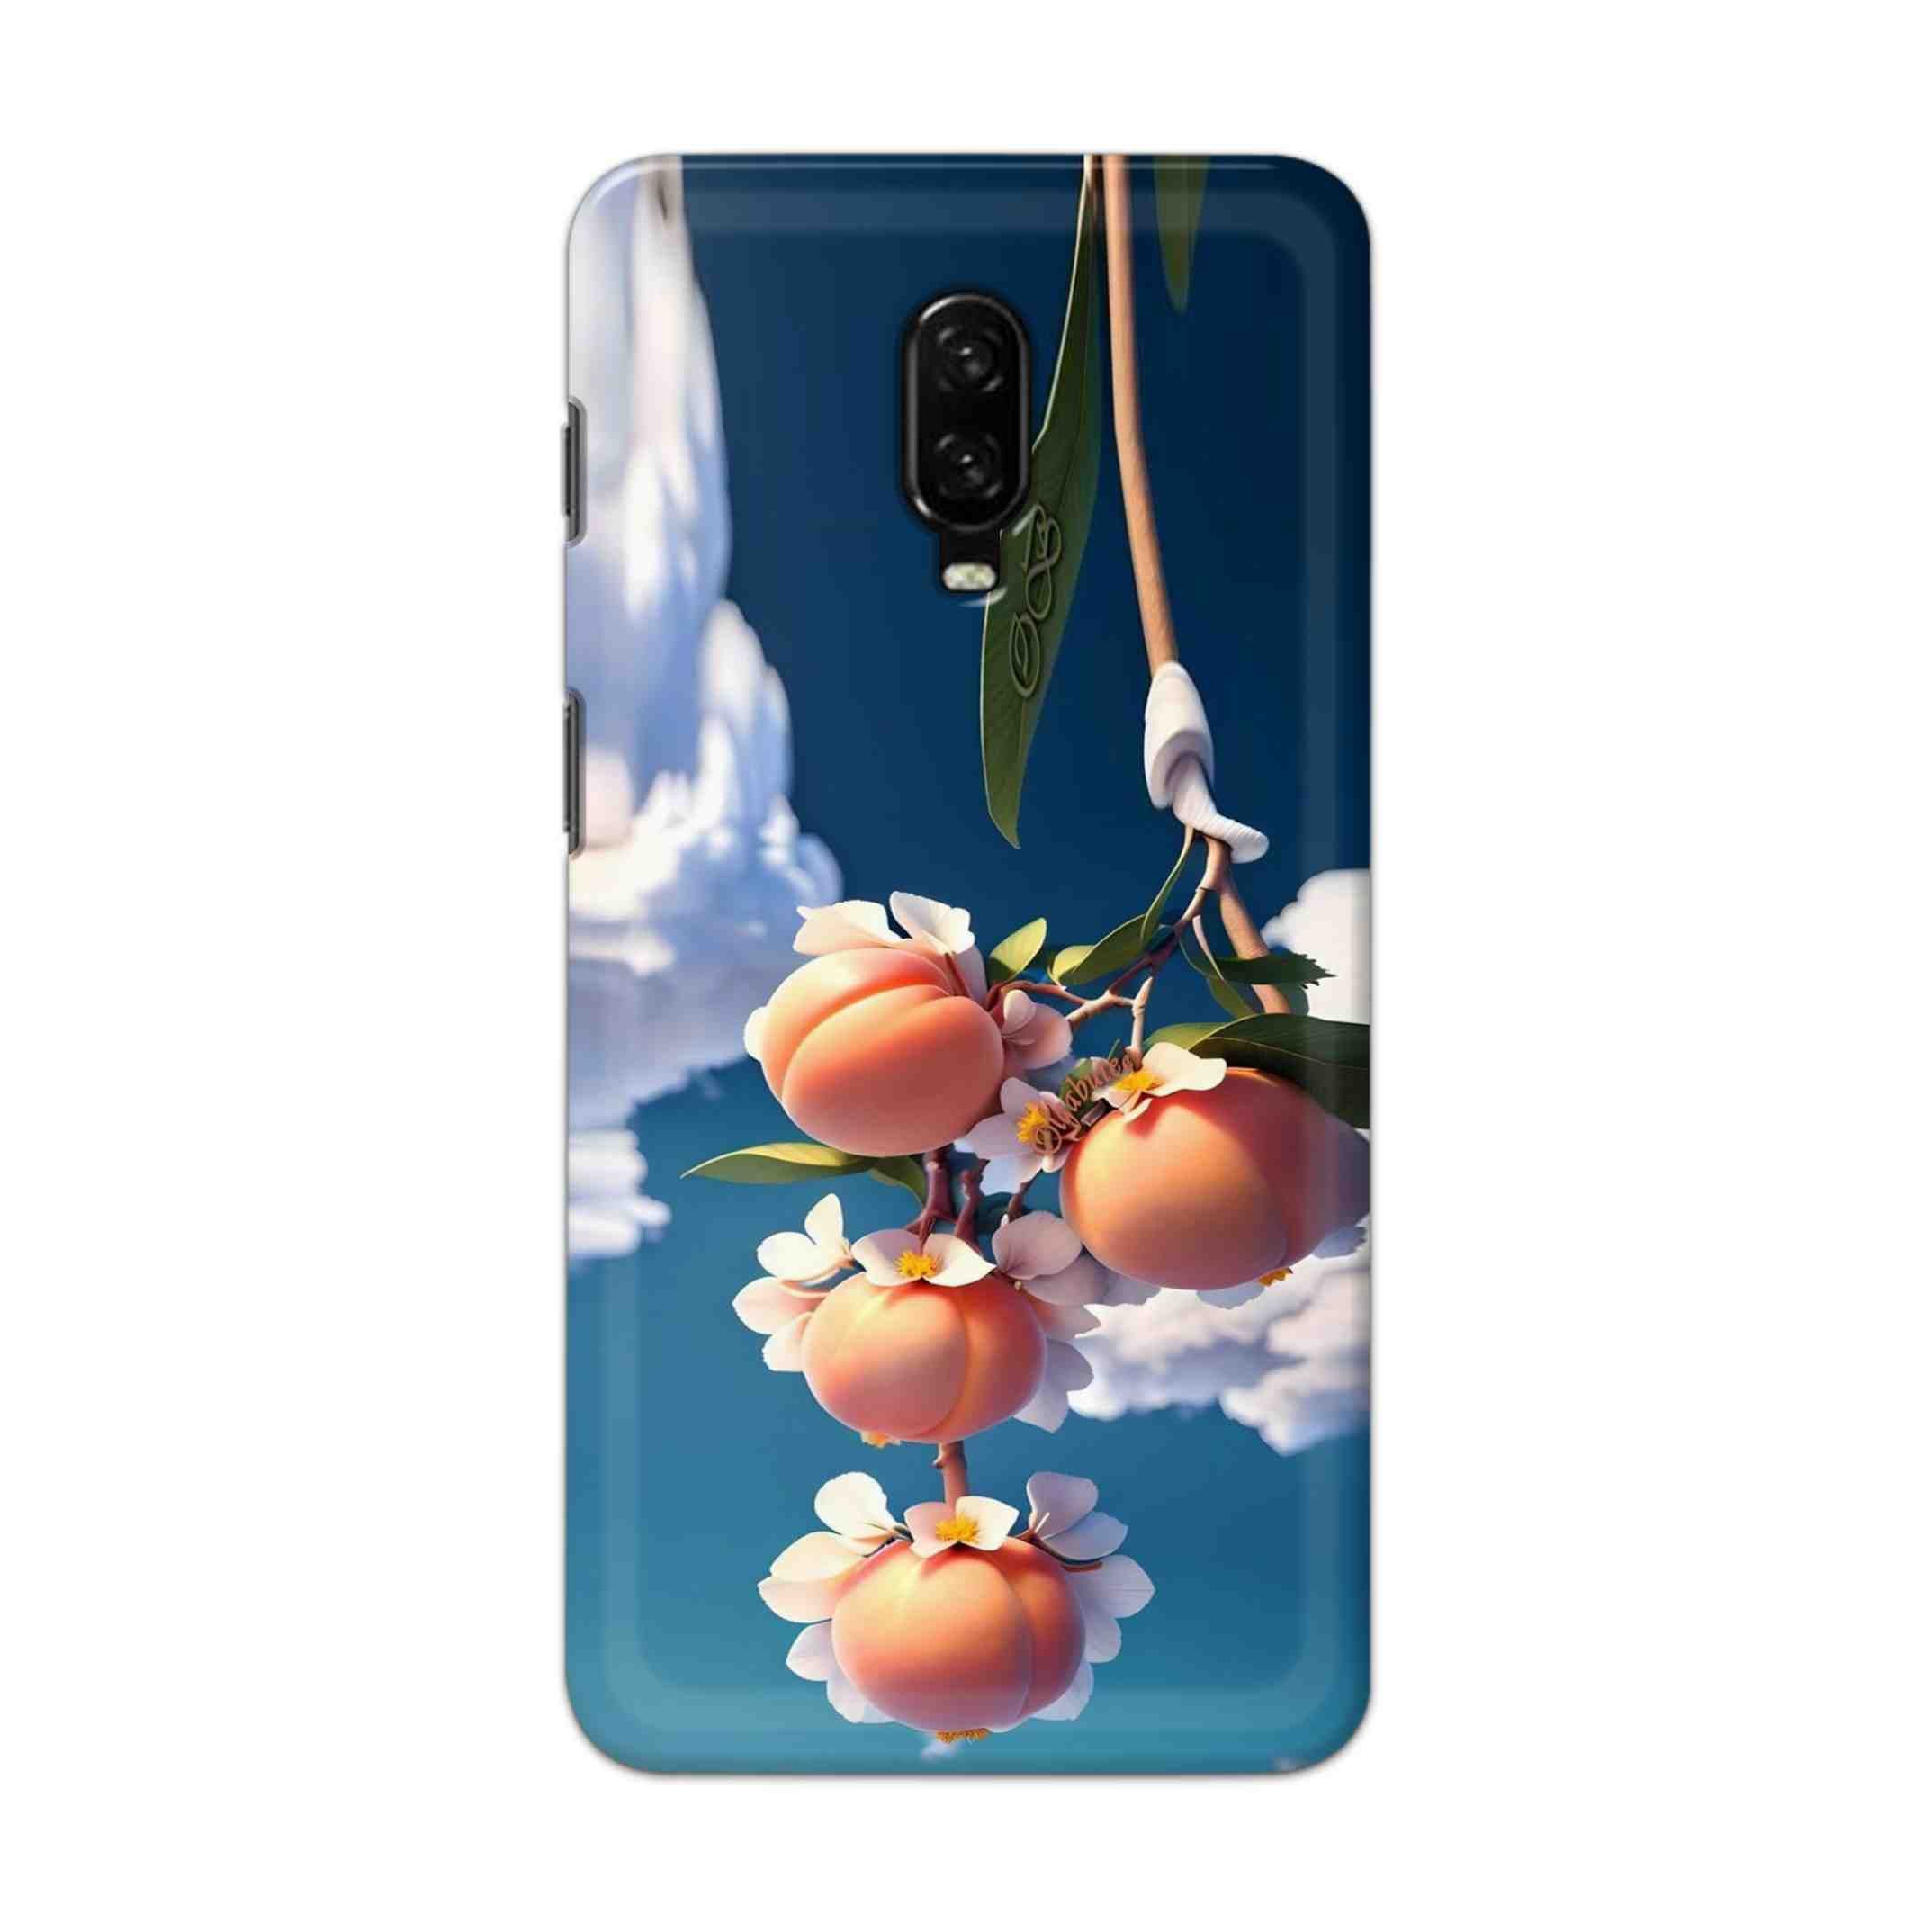 Buy Fruit Hard Back Mobile Phone Case Cover For OnePlus 6T Online